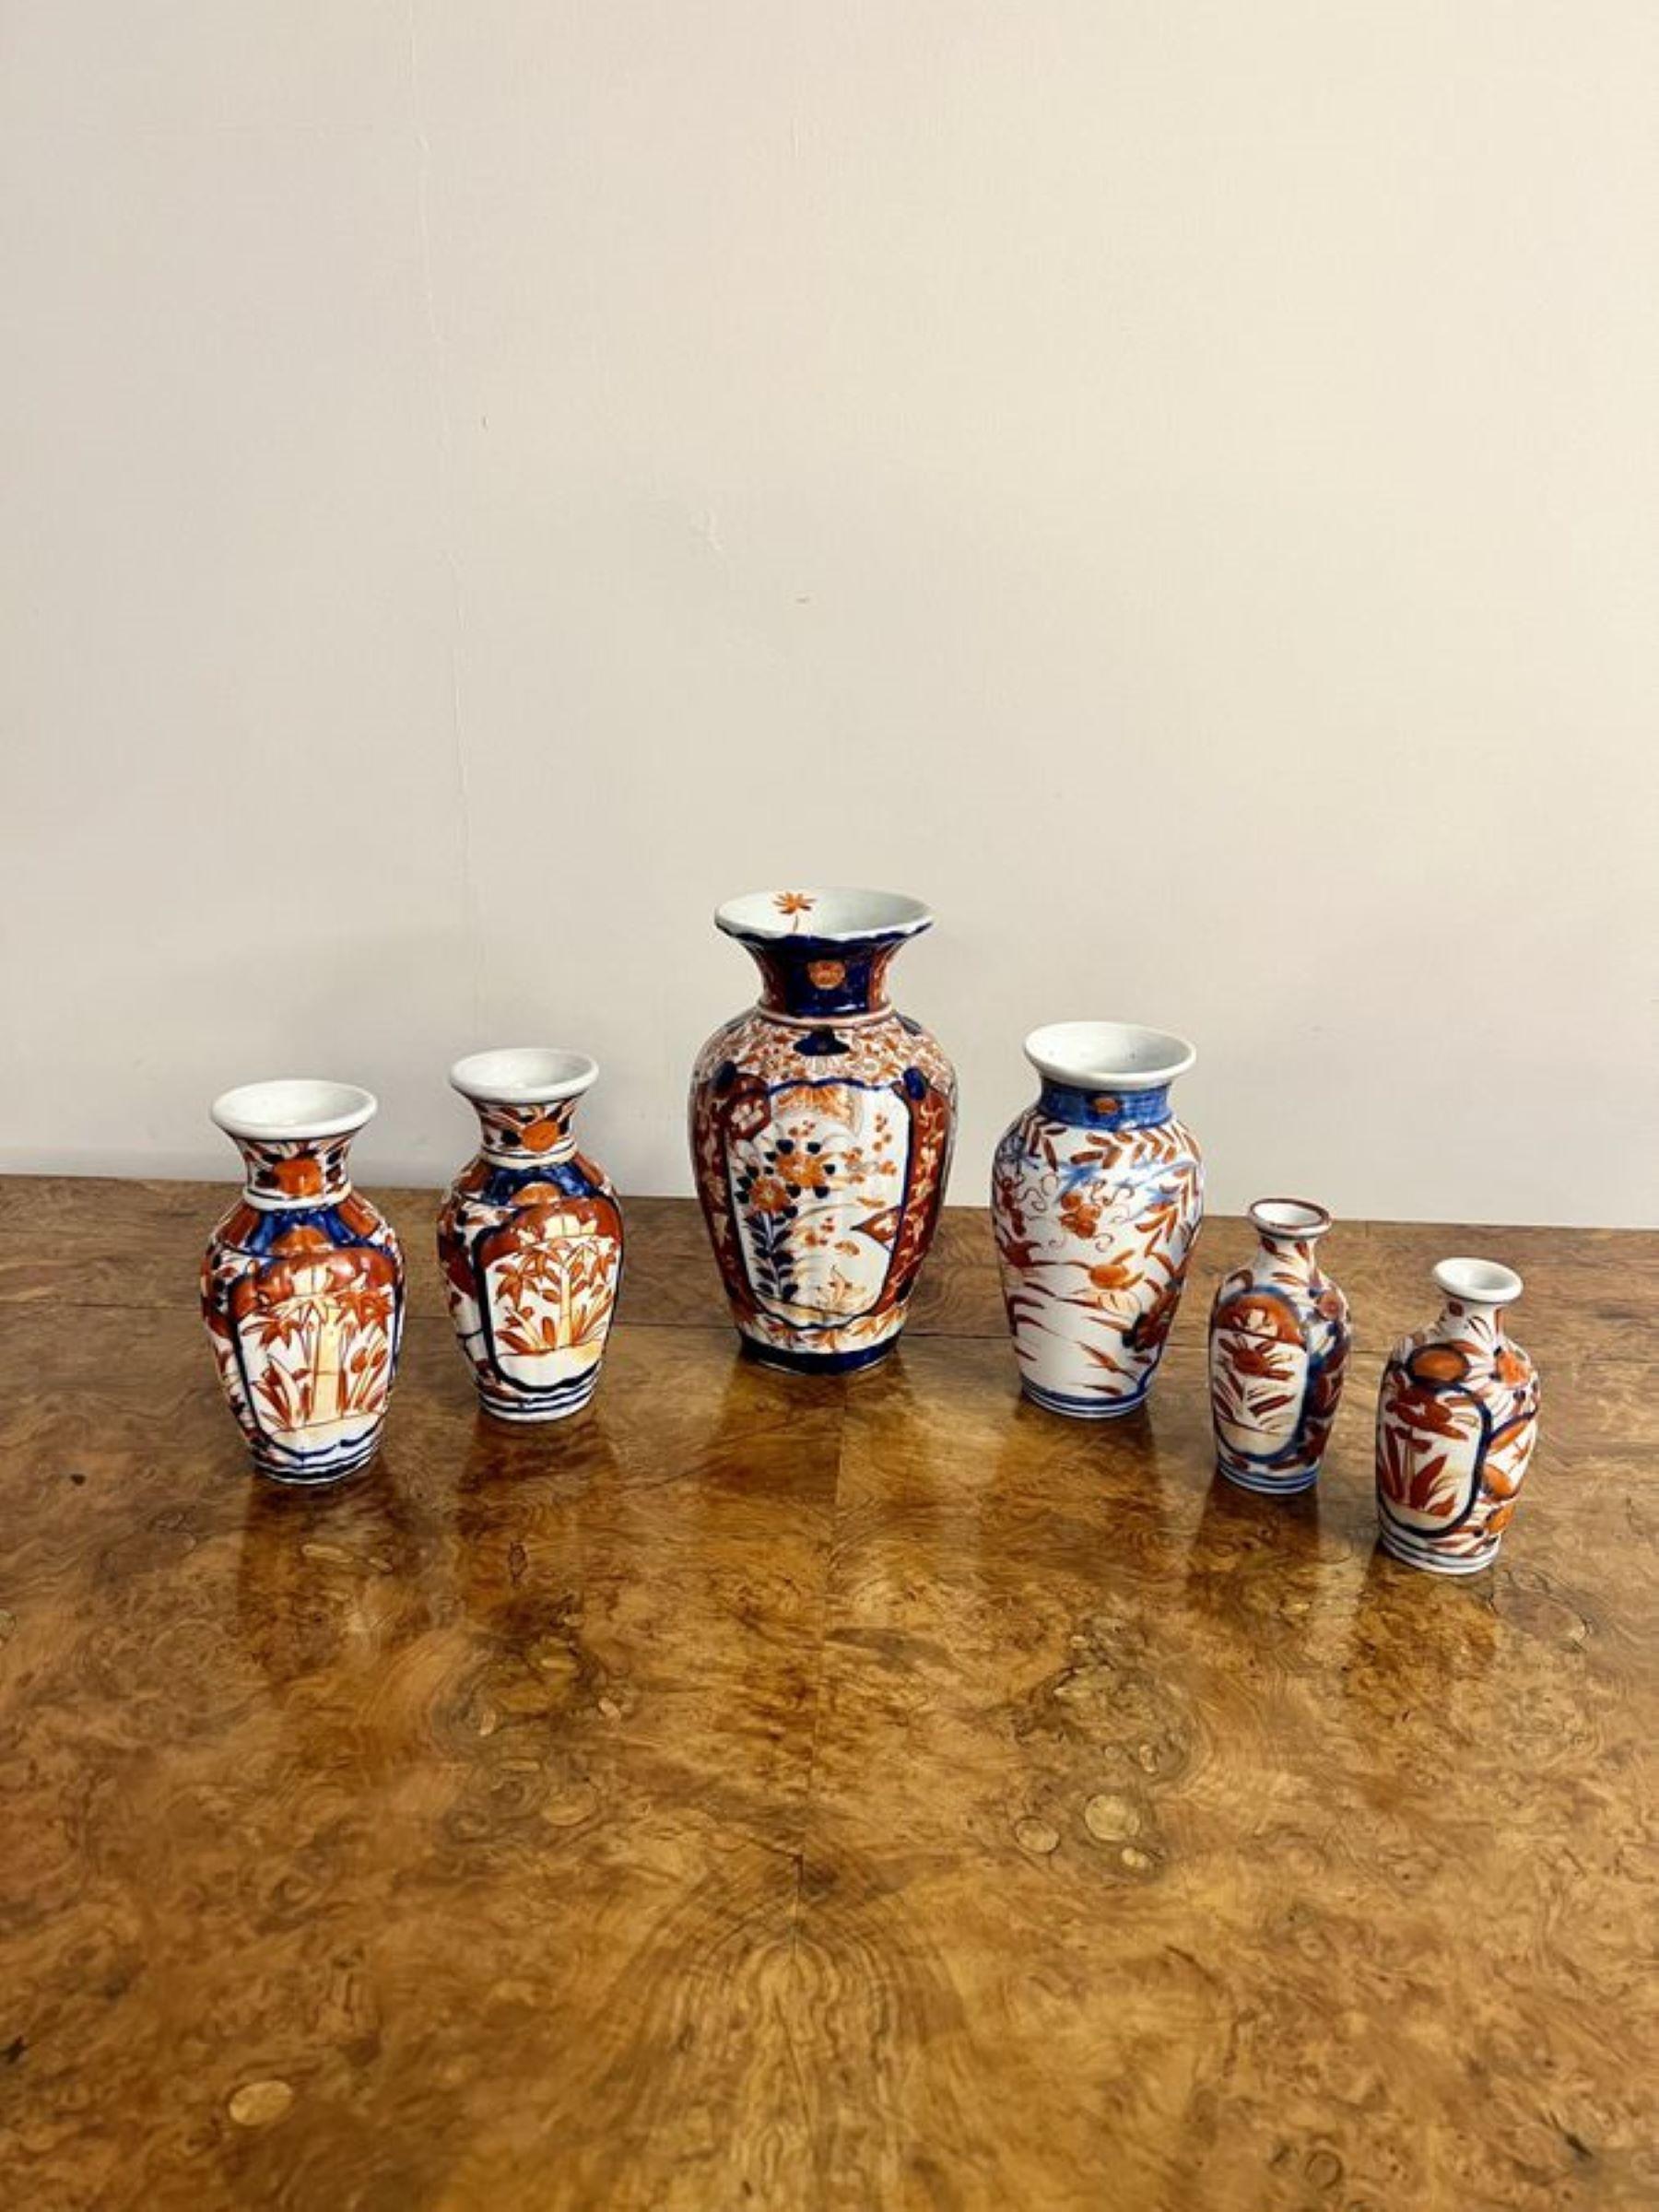 Wonderful collection of six small antique Japanese imari vases having a wonderful collection of various antique Japanese imari vases, hand painted in wonderful red, blue and white colours decorated with flowers, leaves and scrolls. 

D. 1900